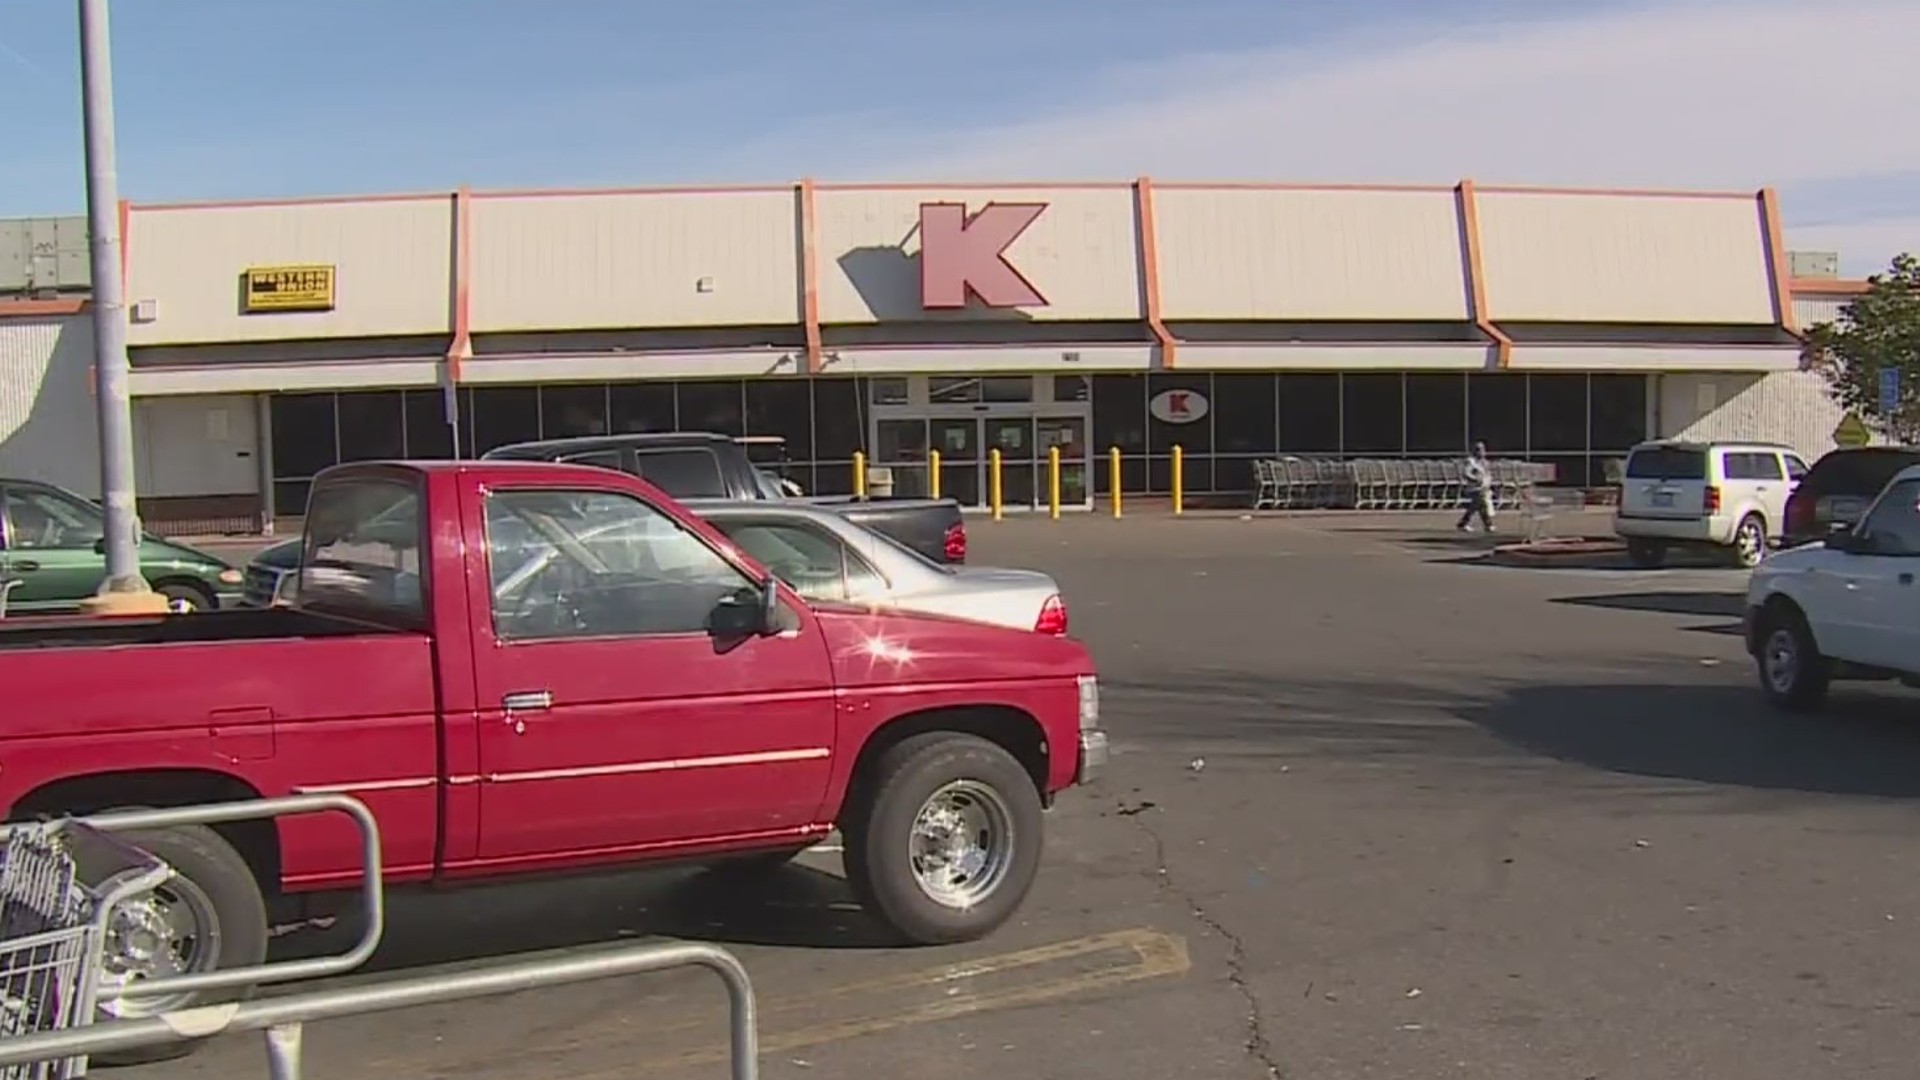 Last Remaining Kmart In California To Close In December